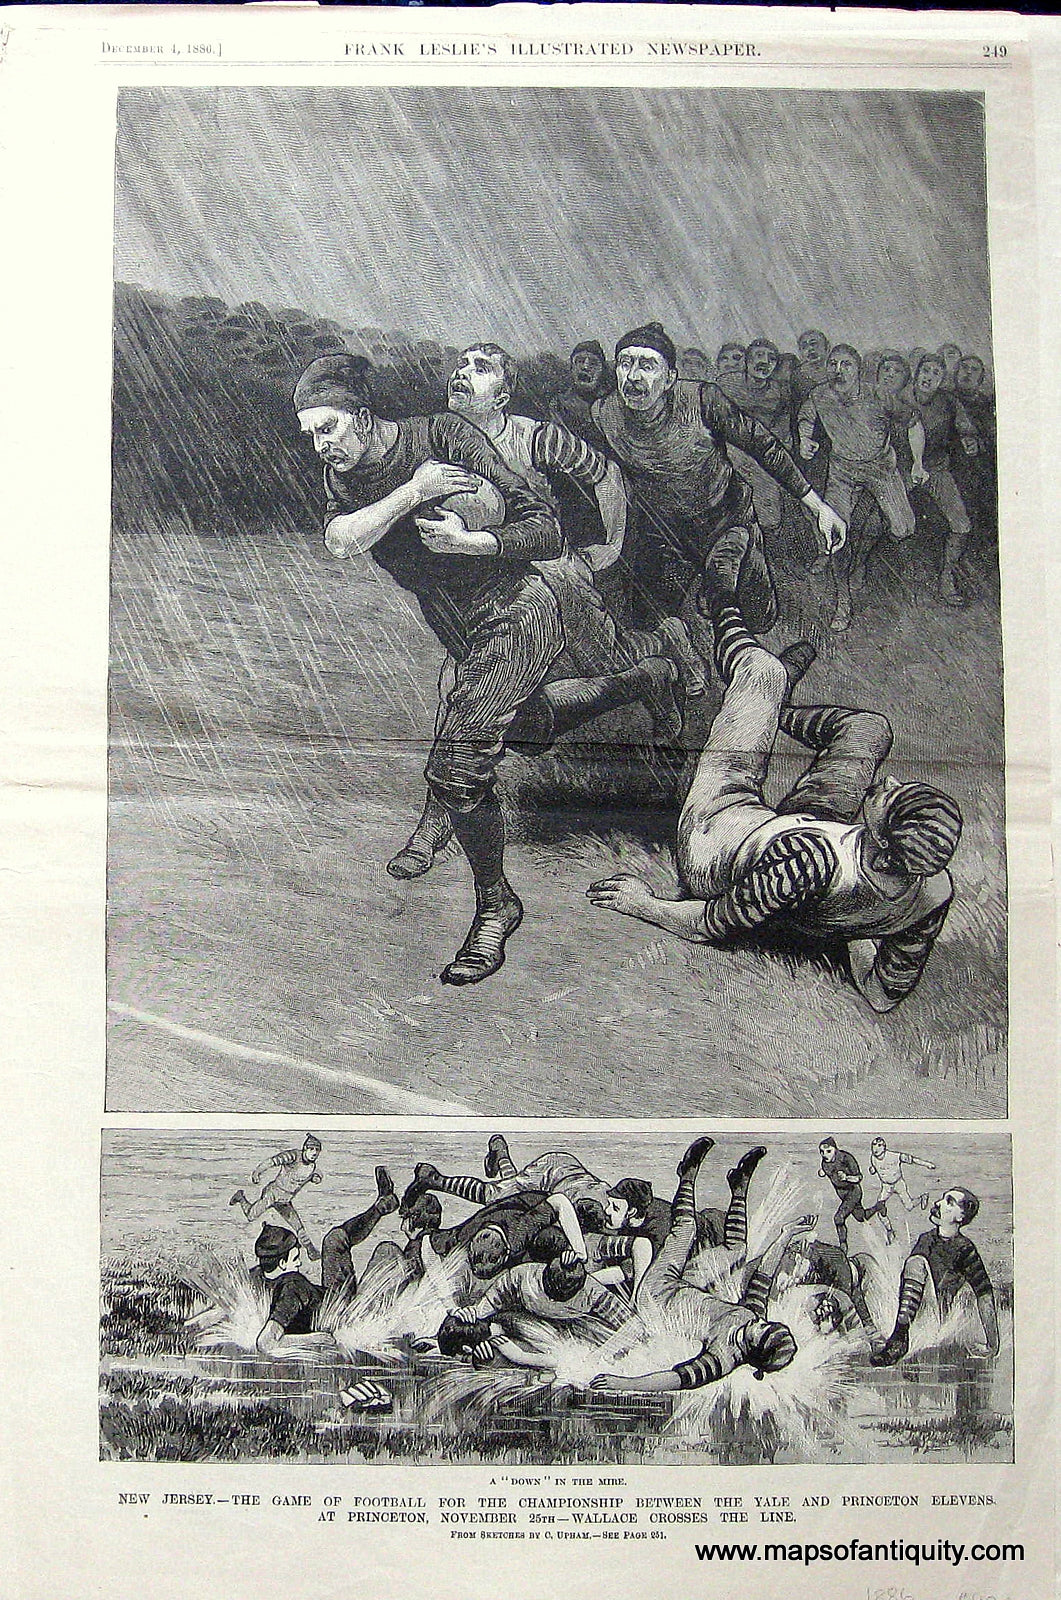 Black-and-White-Antique-Illustration-New-Jersey--The-Game-of-Football-for-the-Championship-between-the-Yale-and-Princeton-Elevens.-At-Princeton-November-25th--Wallace-Crosses-the-Line****-Colleges-New-Jersey-1886-Harper's-Weekly-Maps-Of-Antiquity